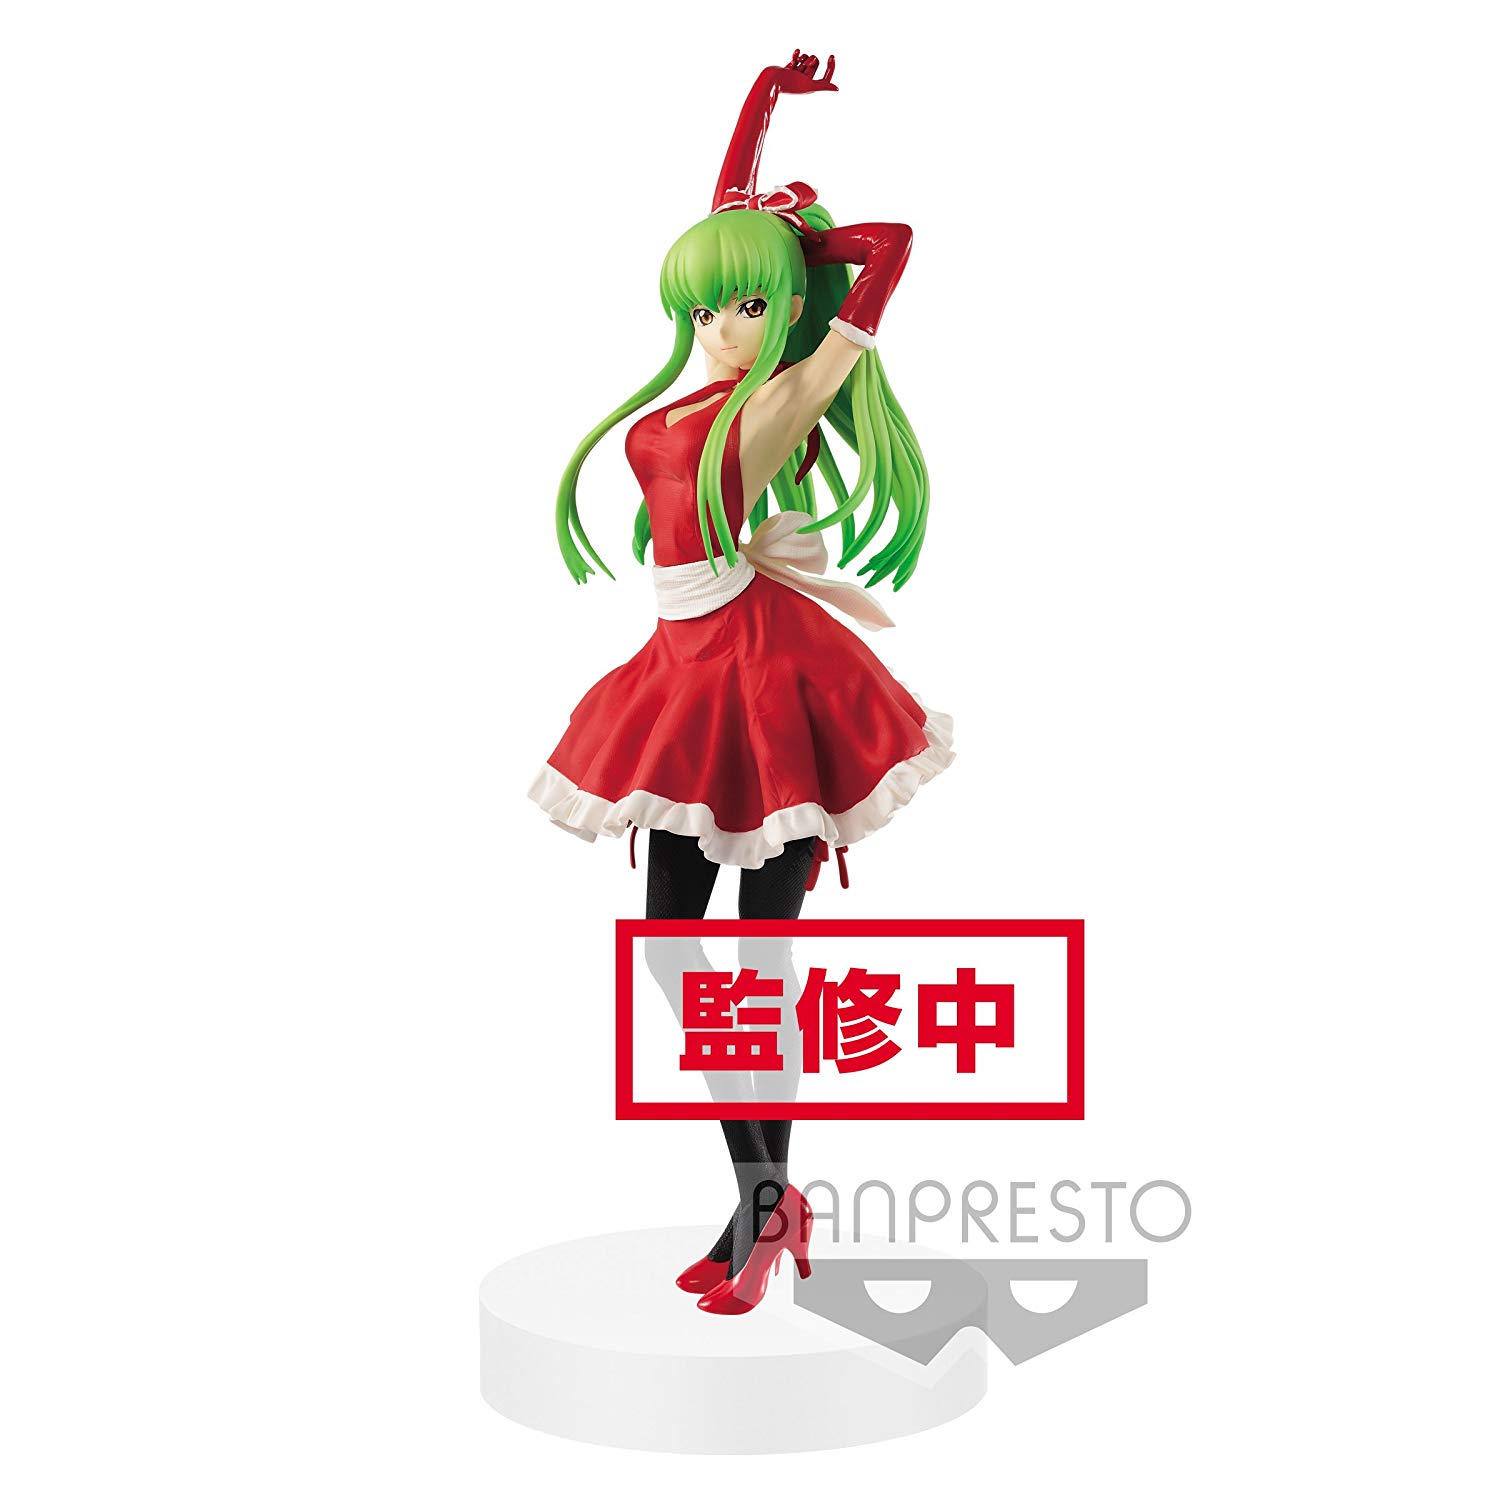 C.C., Red Apron Style, Code Geass Lelouch of the Rebellion, EXQ Figure, Banpresto